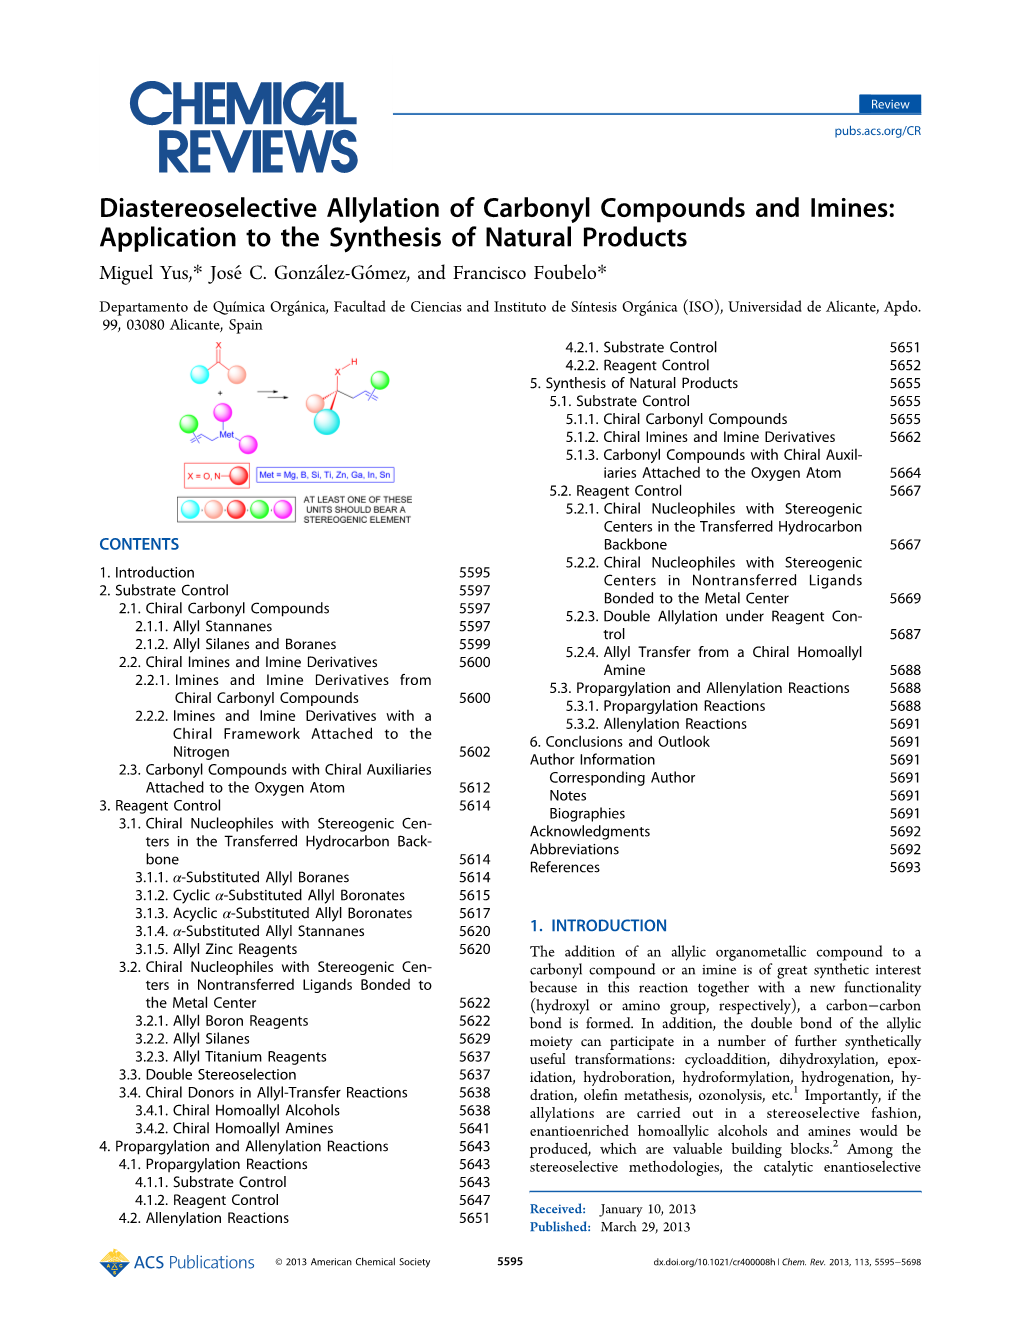 Diastereoselective Allylation of Carbonyl Compounds and Imines: Application to the Synthesis of Natural Products Miguel Yus,* Joséc